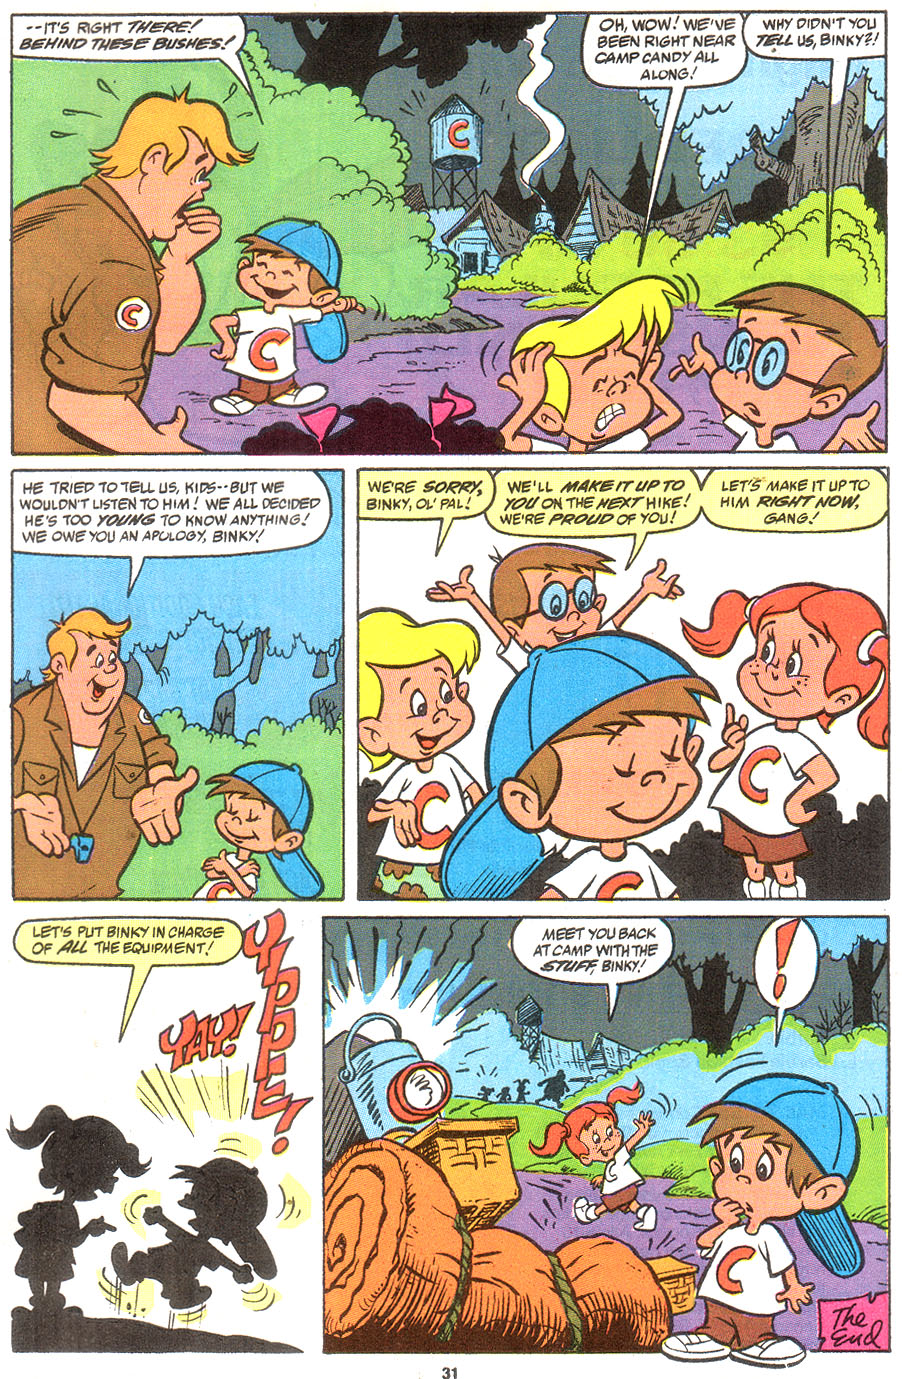 Camp Candy 5 Page 32